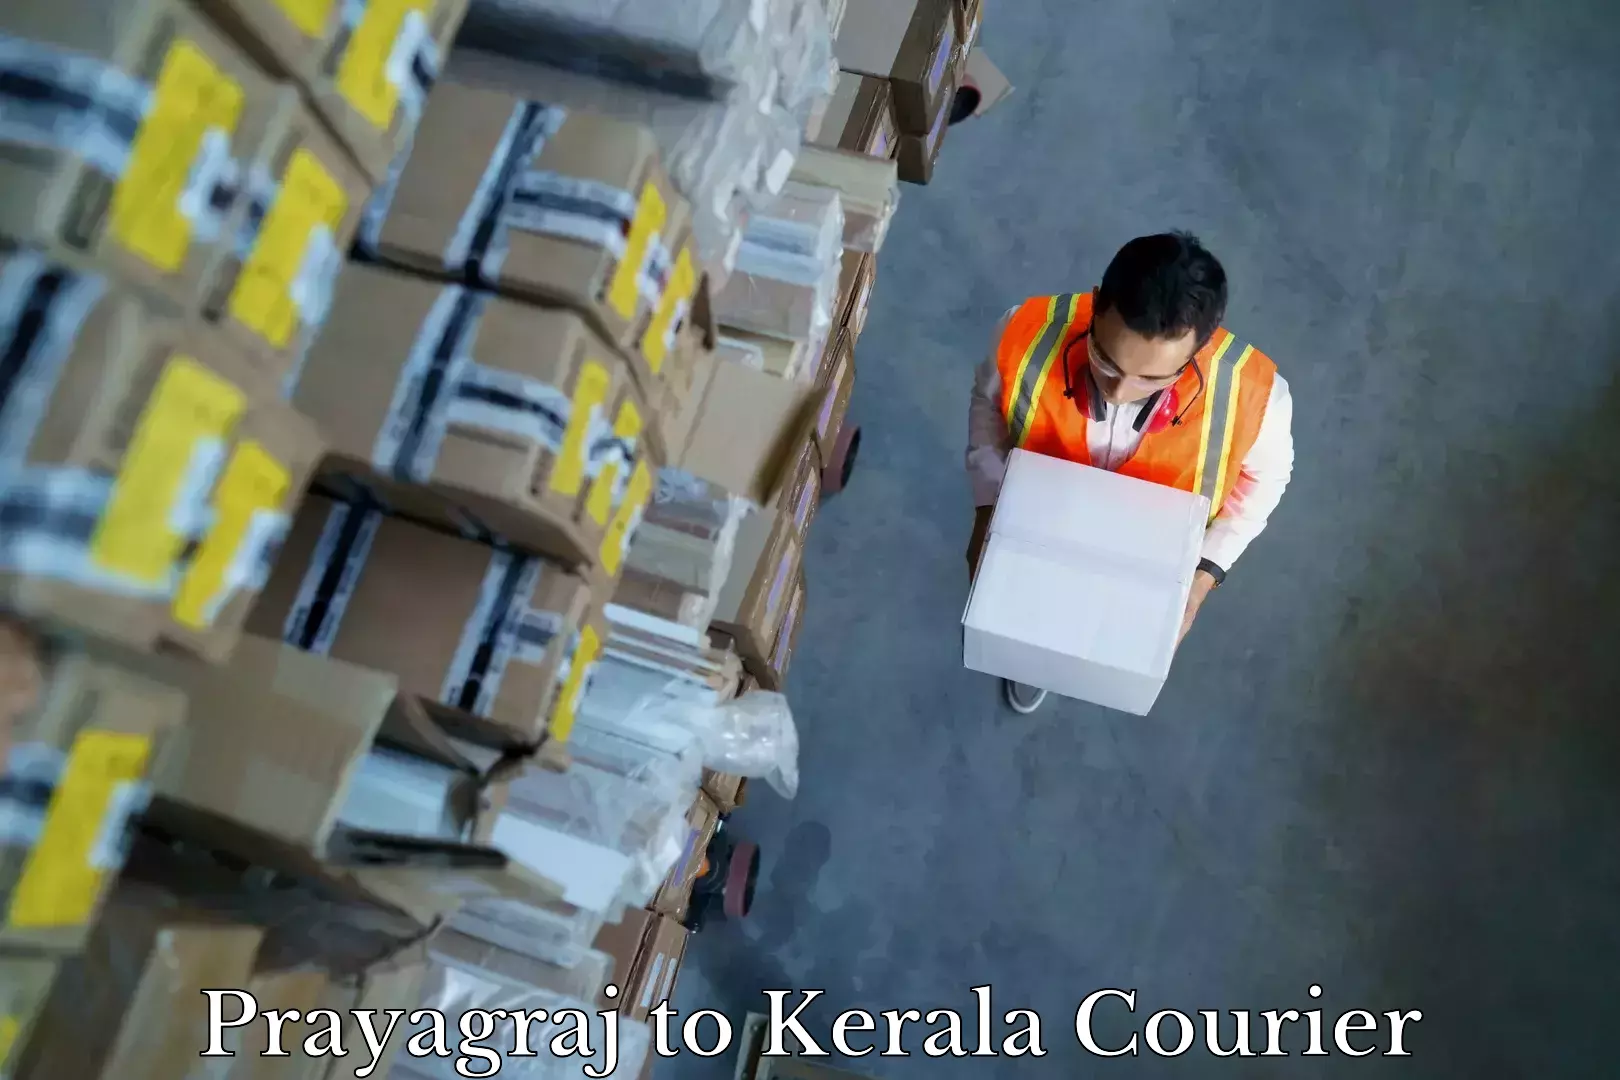 Hassle-free relocation Prayagraj to Cochin University of Science and Technology